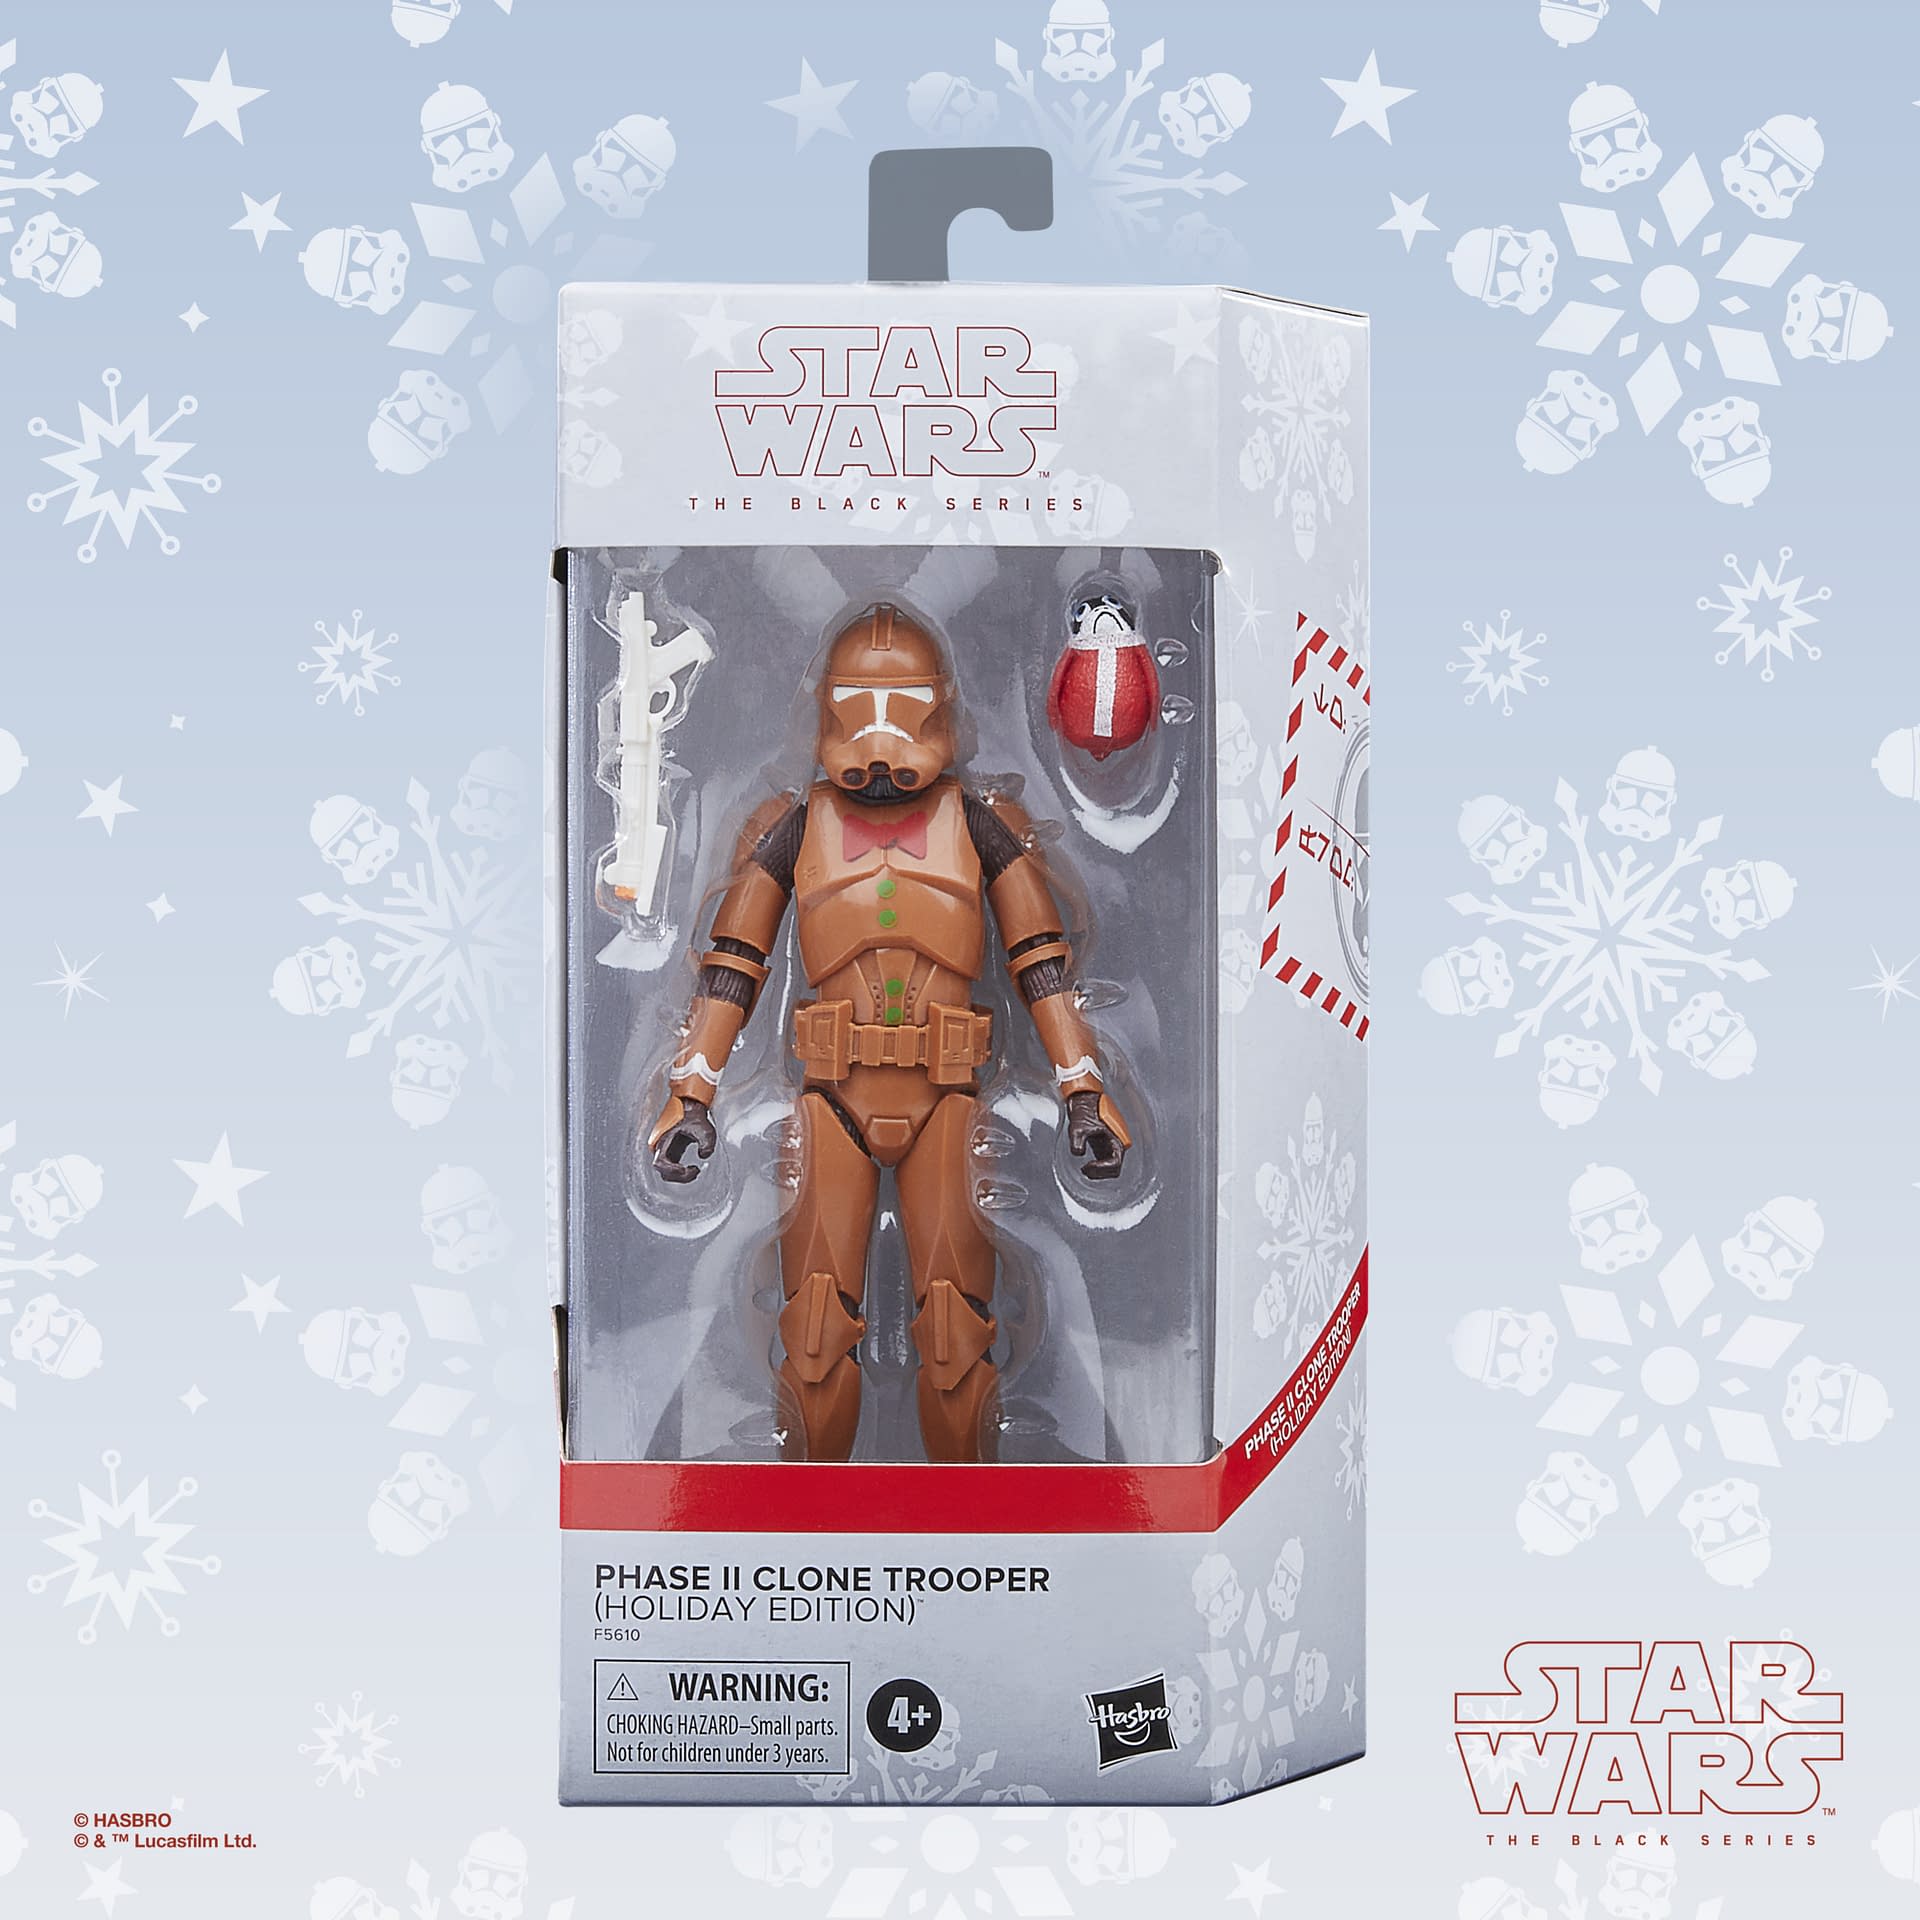 Star Wars Gingerbread Clone Trooper is Ready for Frosting with Hasbro